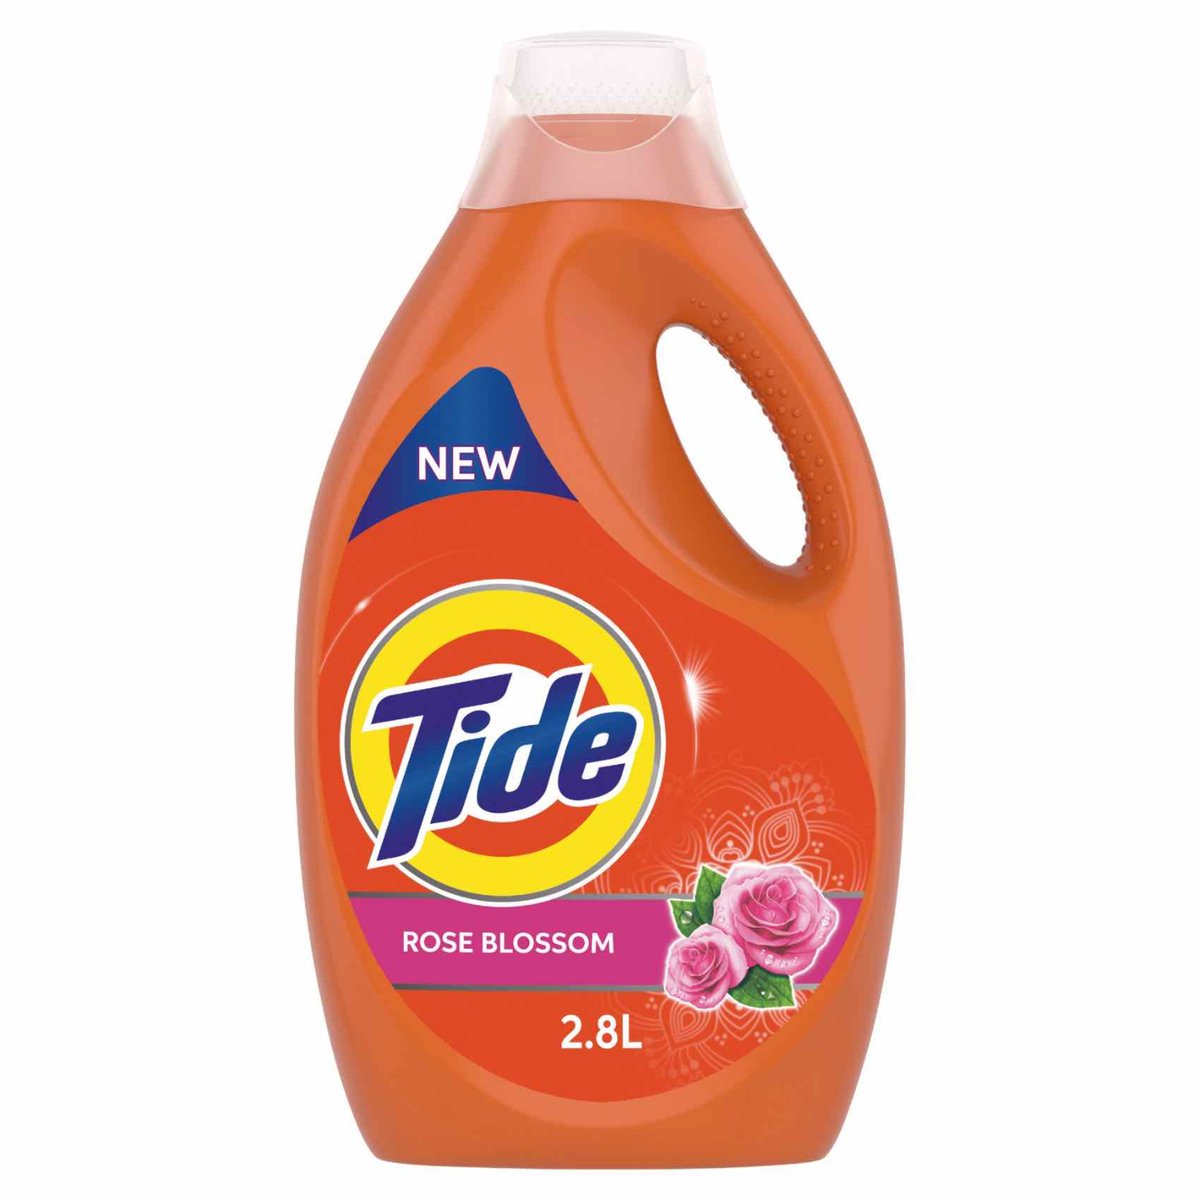 Tide Automatic Power Gel, Rose Blossom Scent, 2.8 Litres